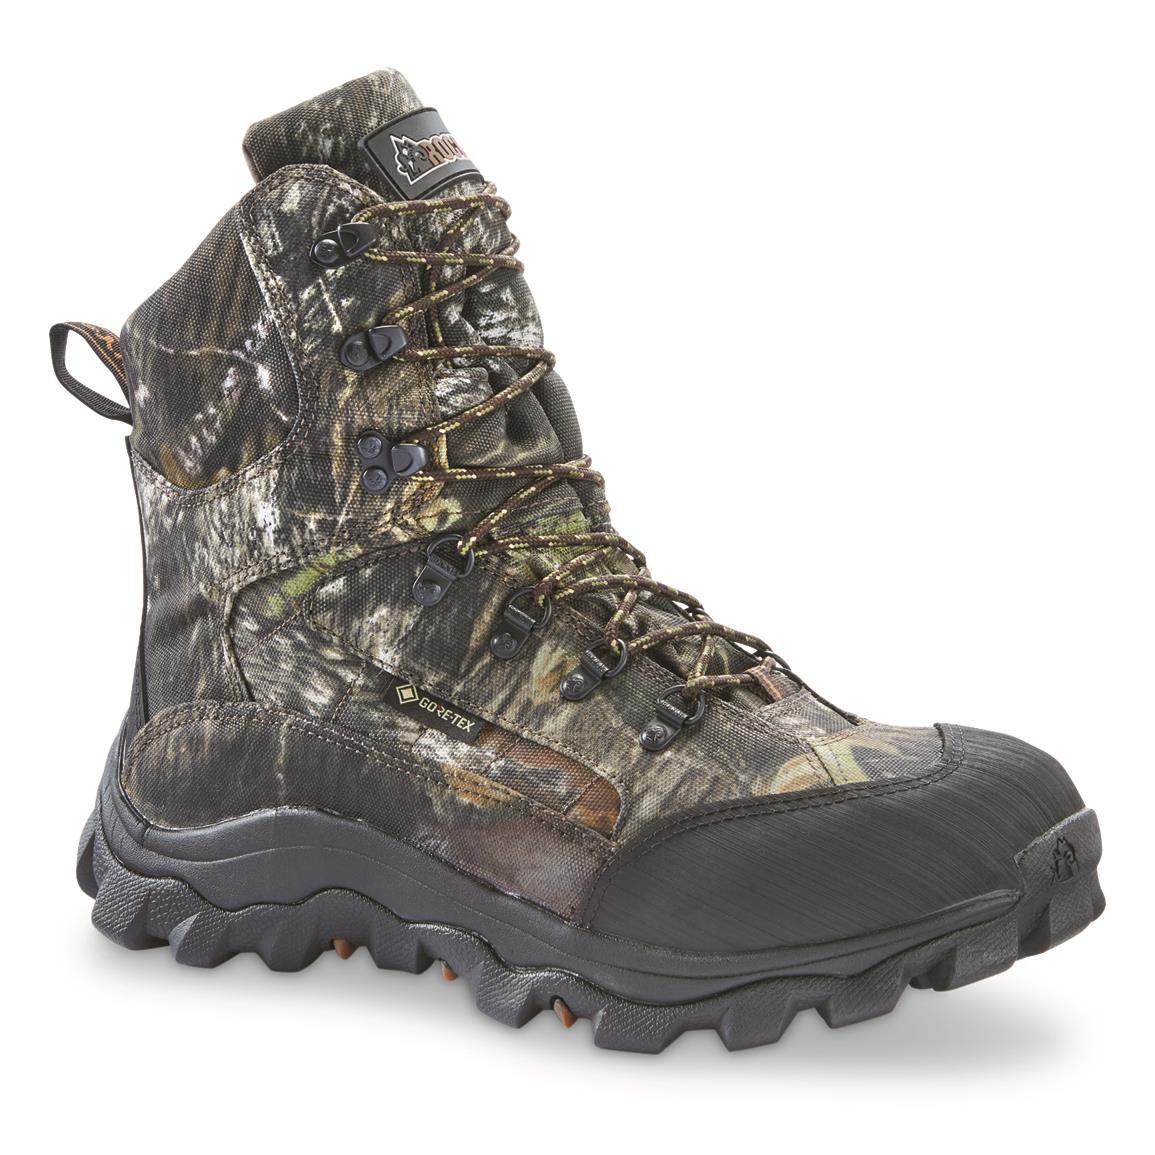 Rocky Lynx 8" GORE-TEX Waterproof Insulated Hunting Boots, 800 Gram